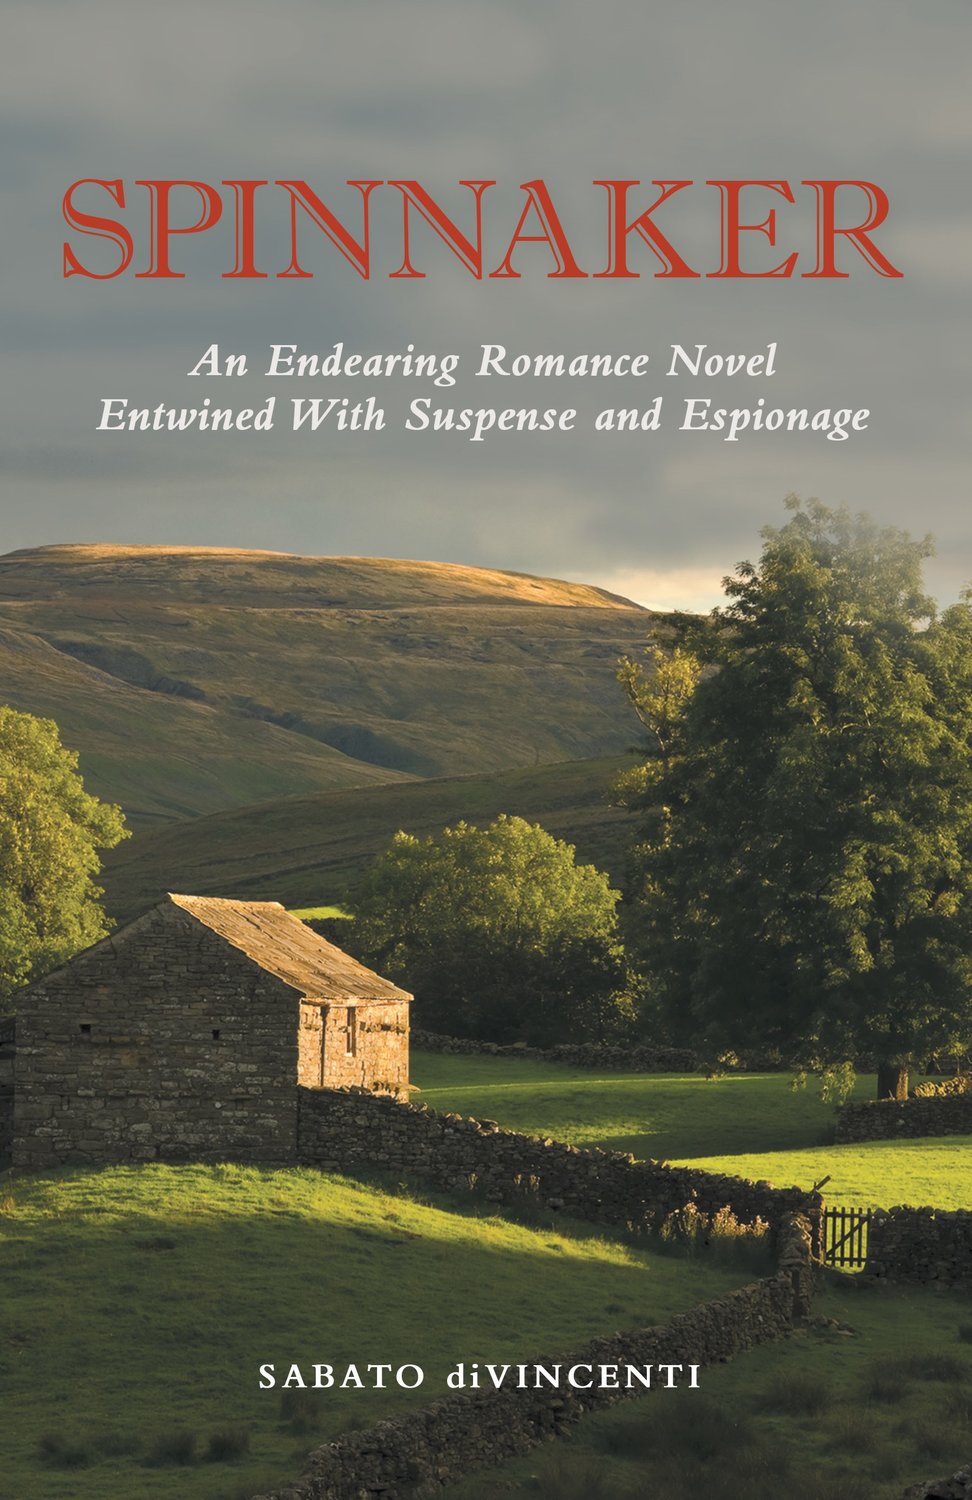 “Spinnaker: An Endearing Romance Novel Entwined With Suspense and Espionage”